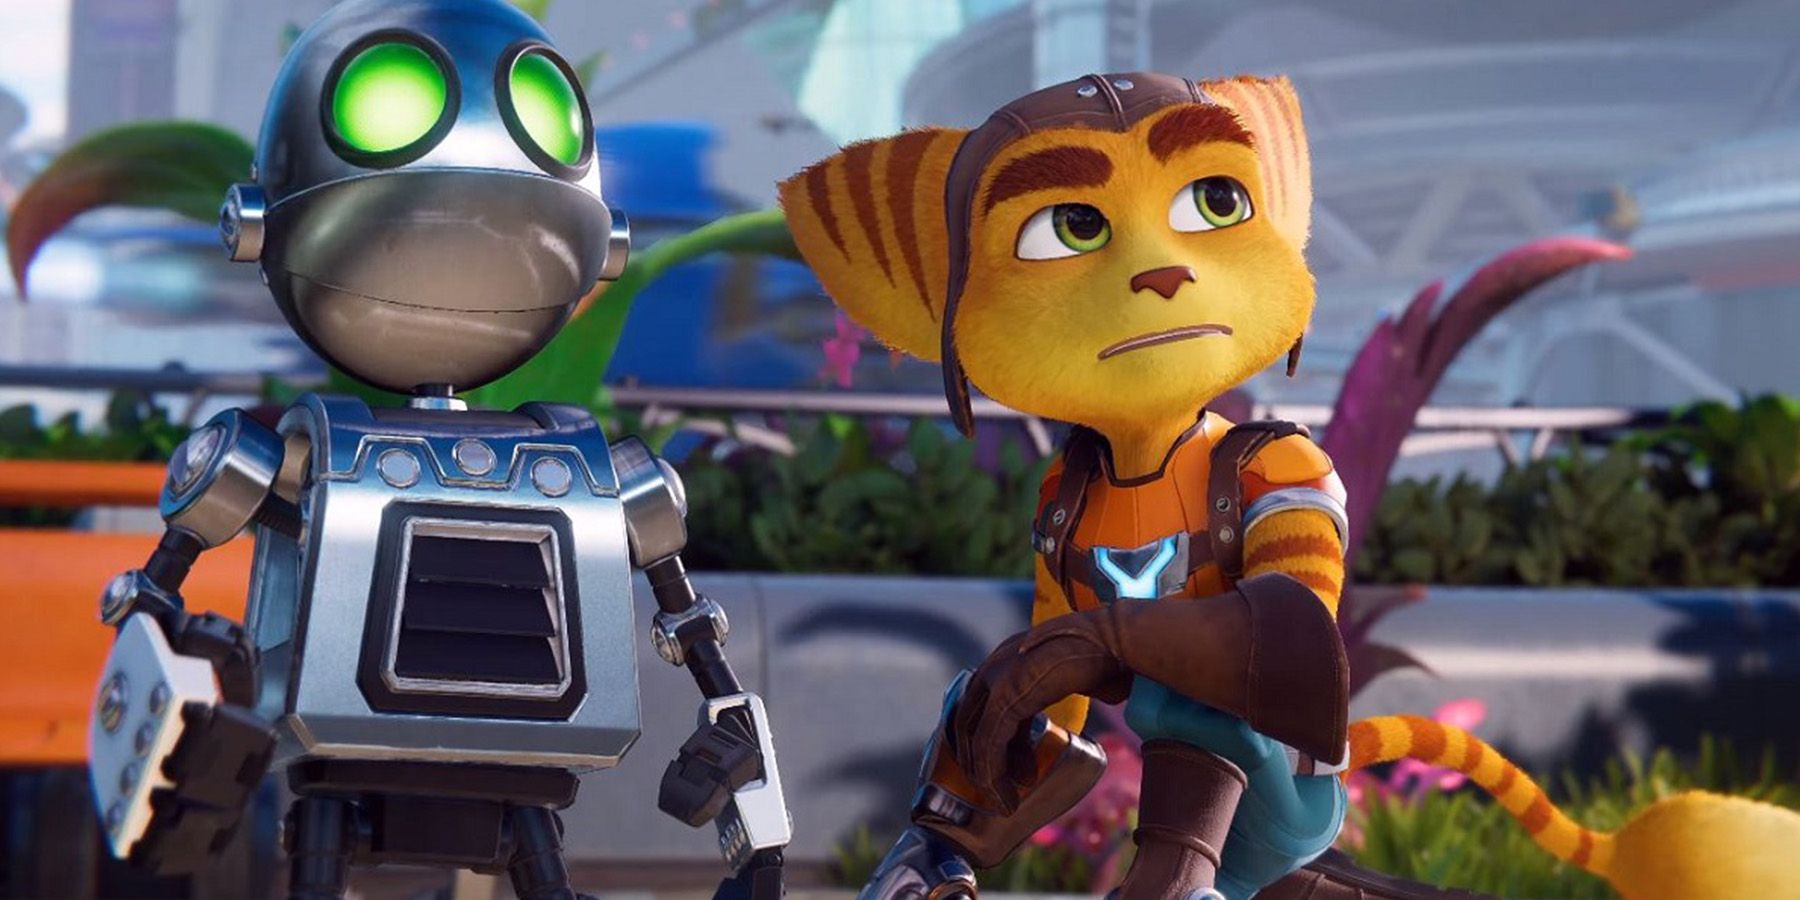 Ratchet and Clank together